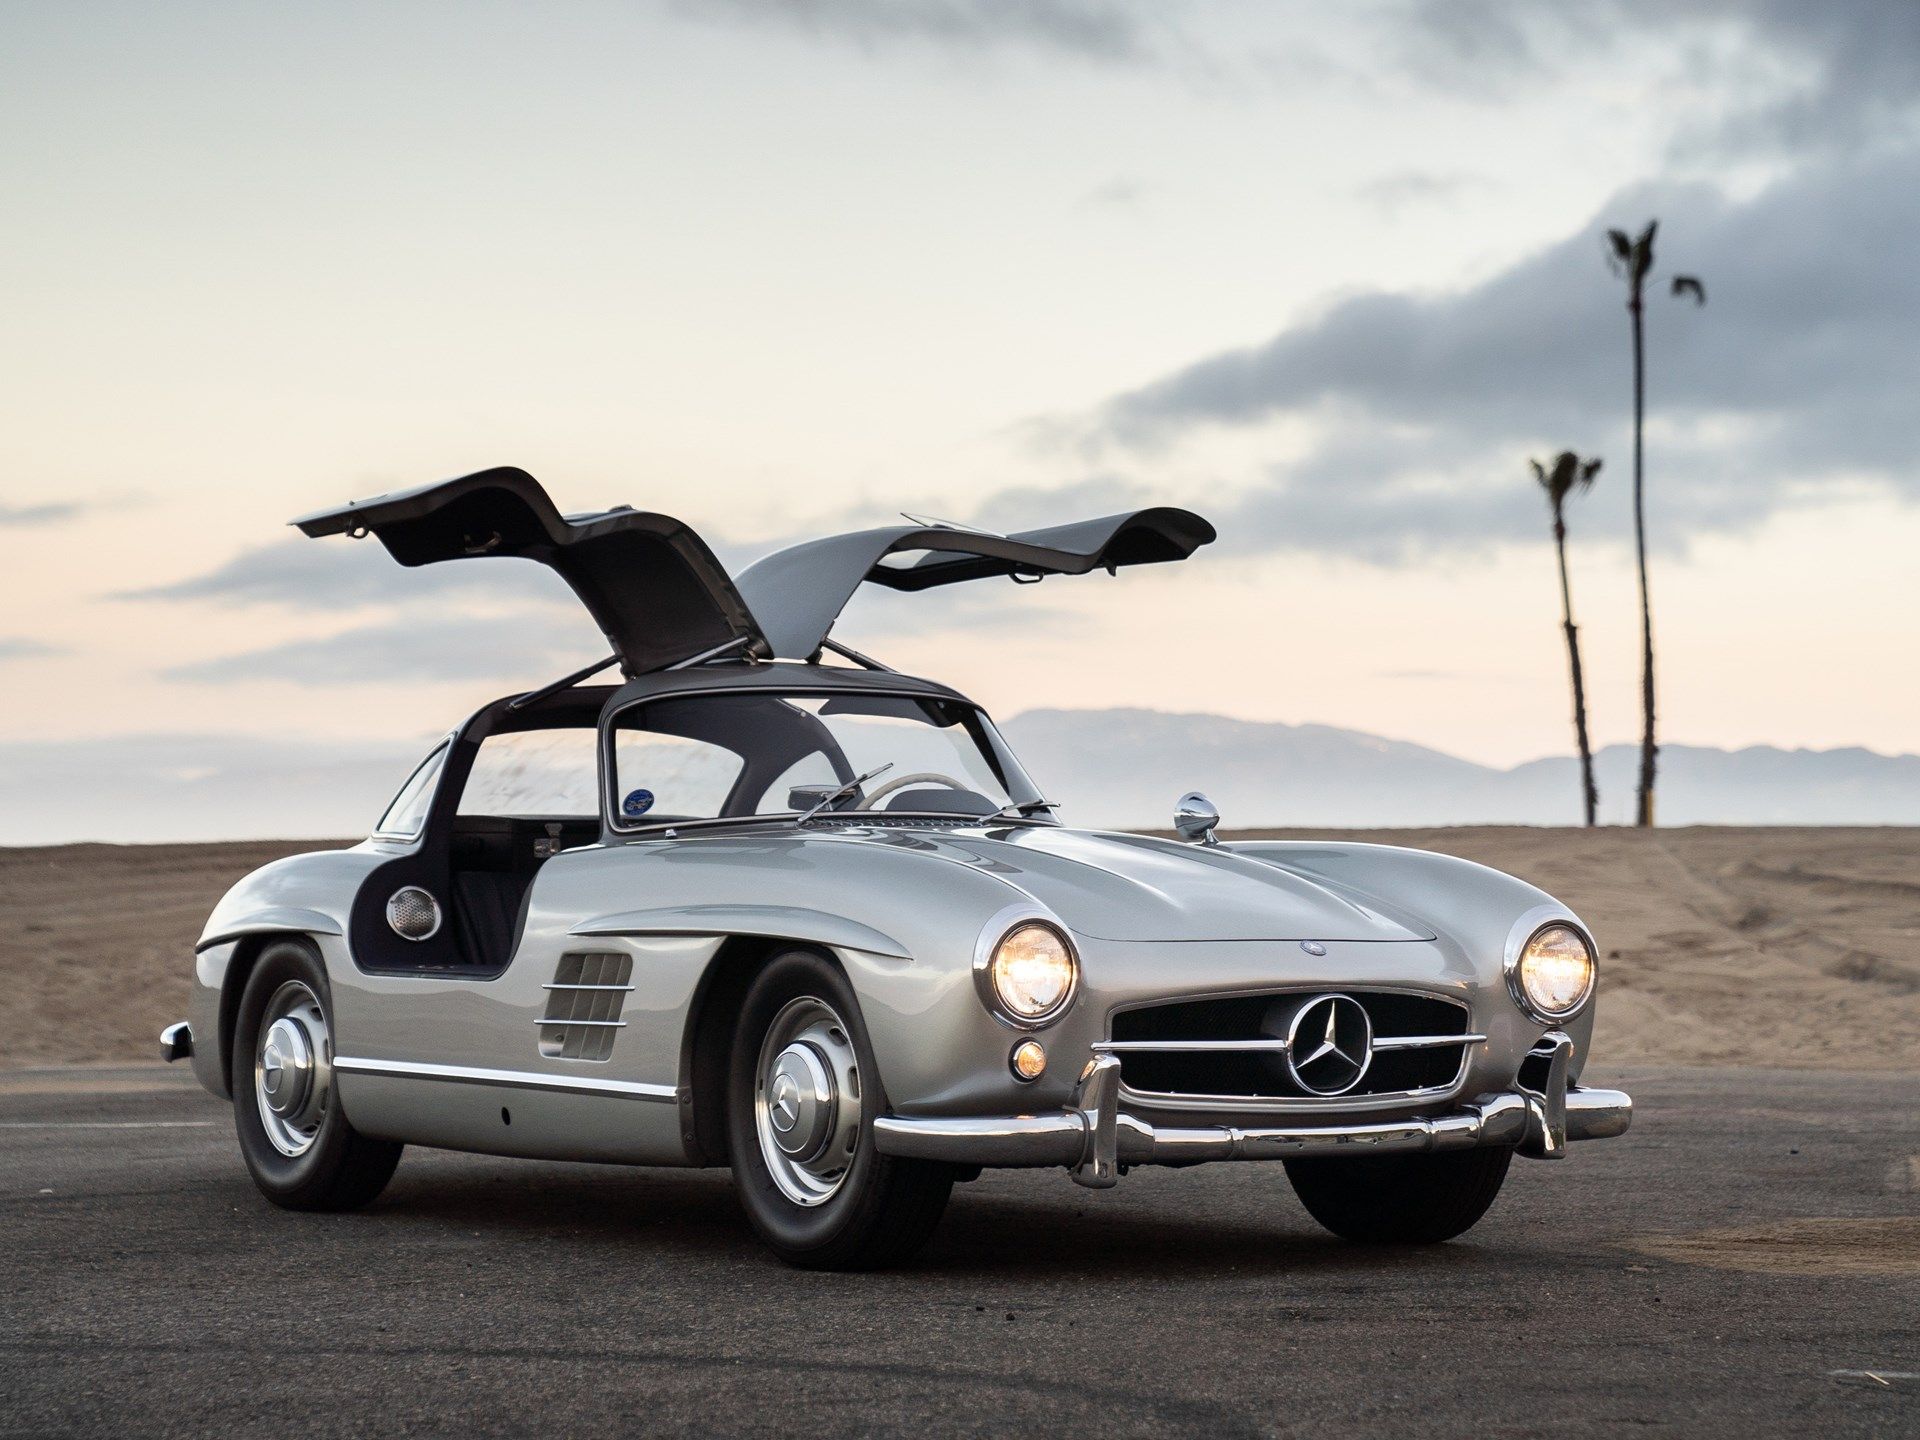 Silver Gray Metallic Mercedes-Benz 300SL Gullwing showing off with its headlights on